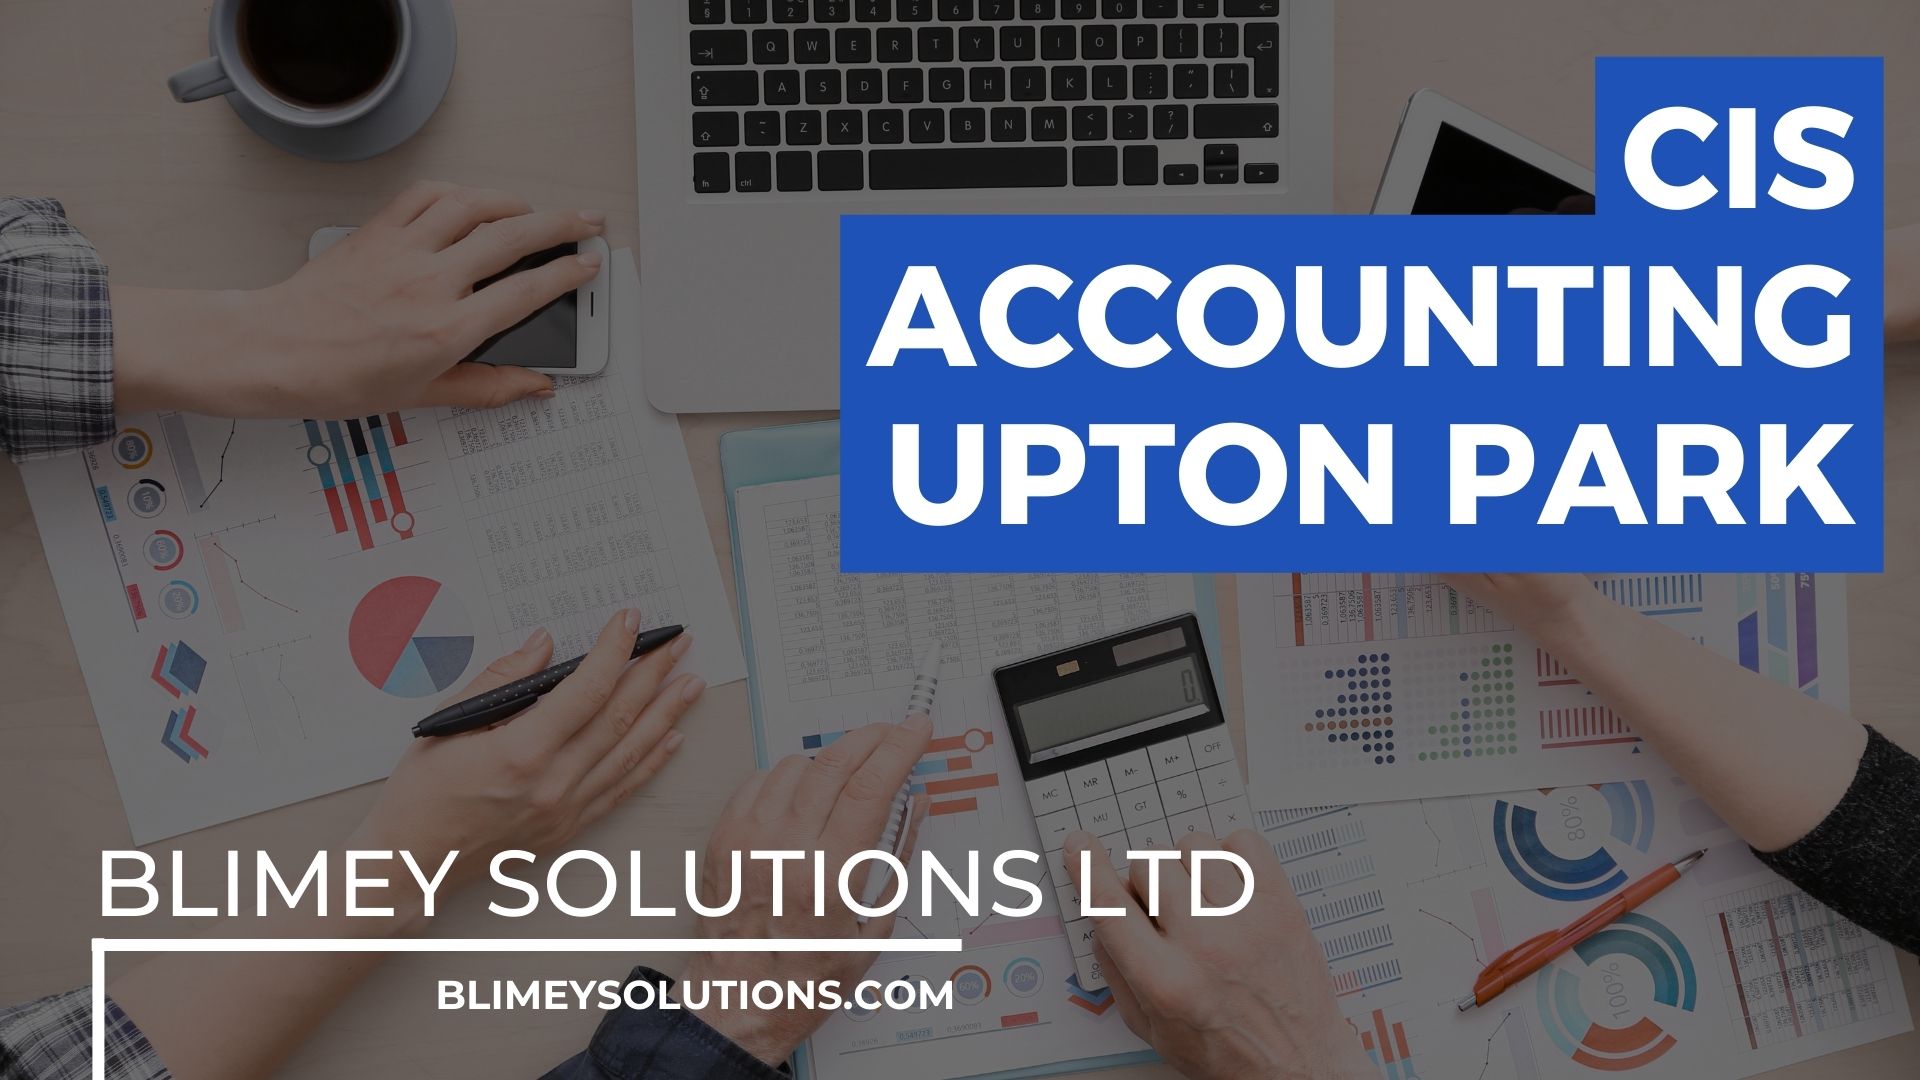 Cis Accounting In Upton Park E7 London